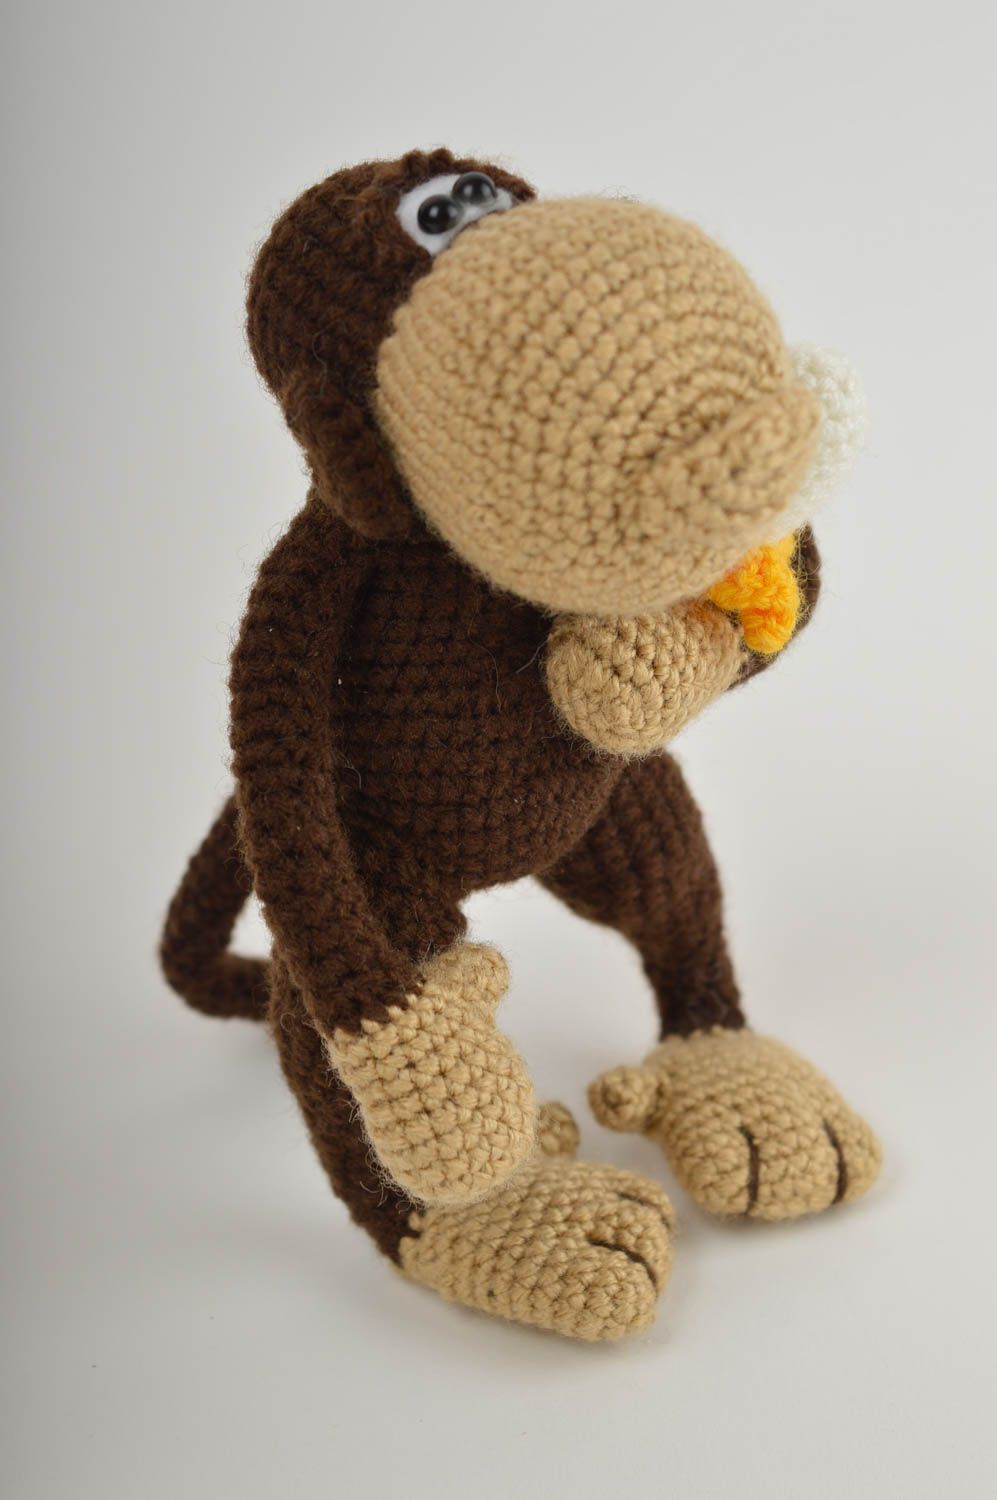 Knitted little 6 inches stuffed monkey in brown, yellow, beige colors photo 2